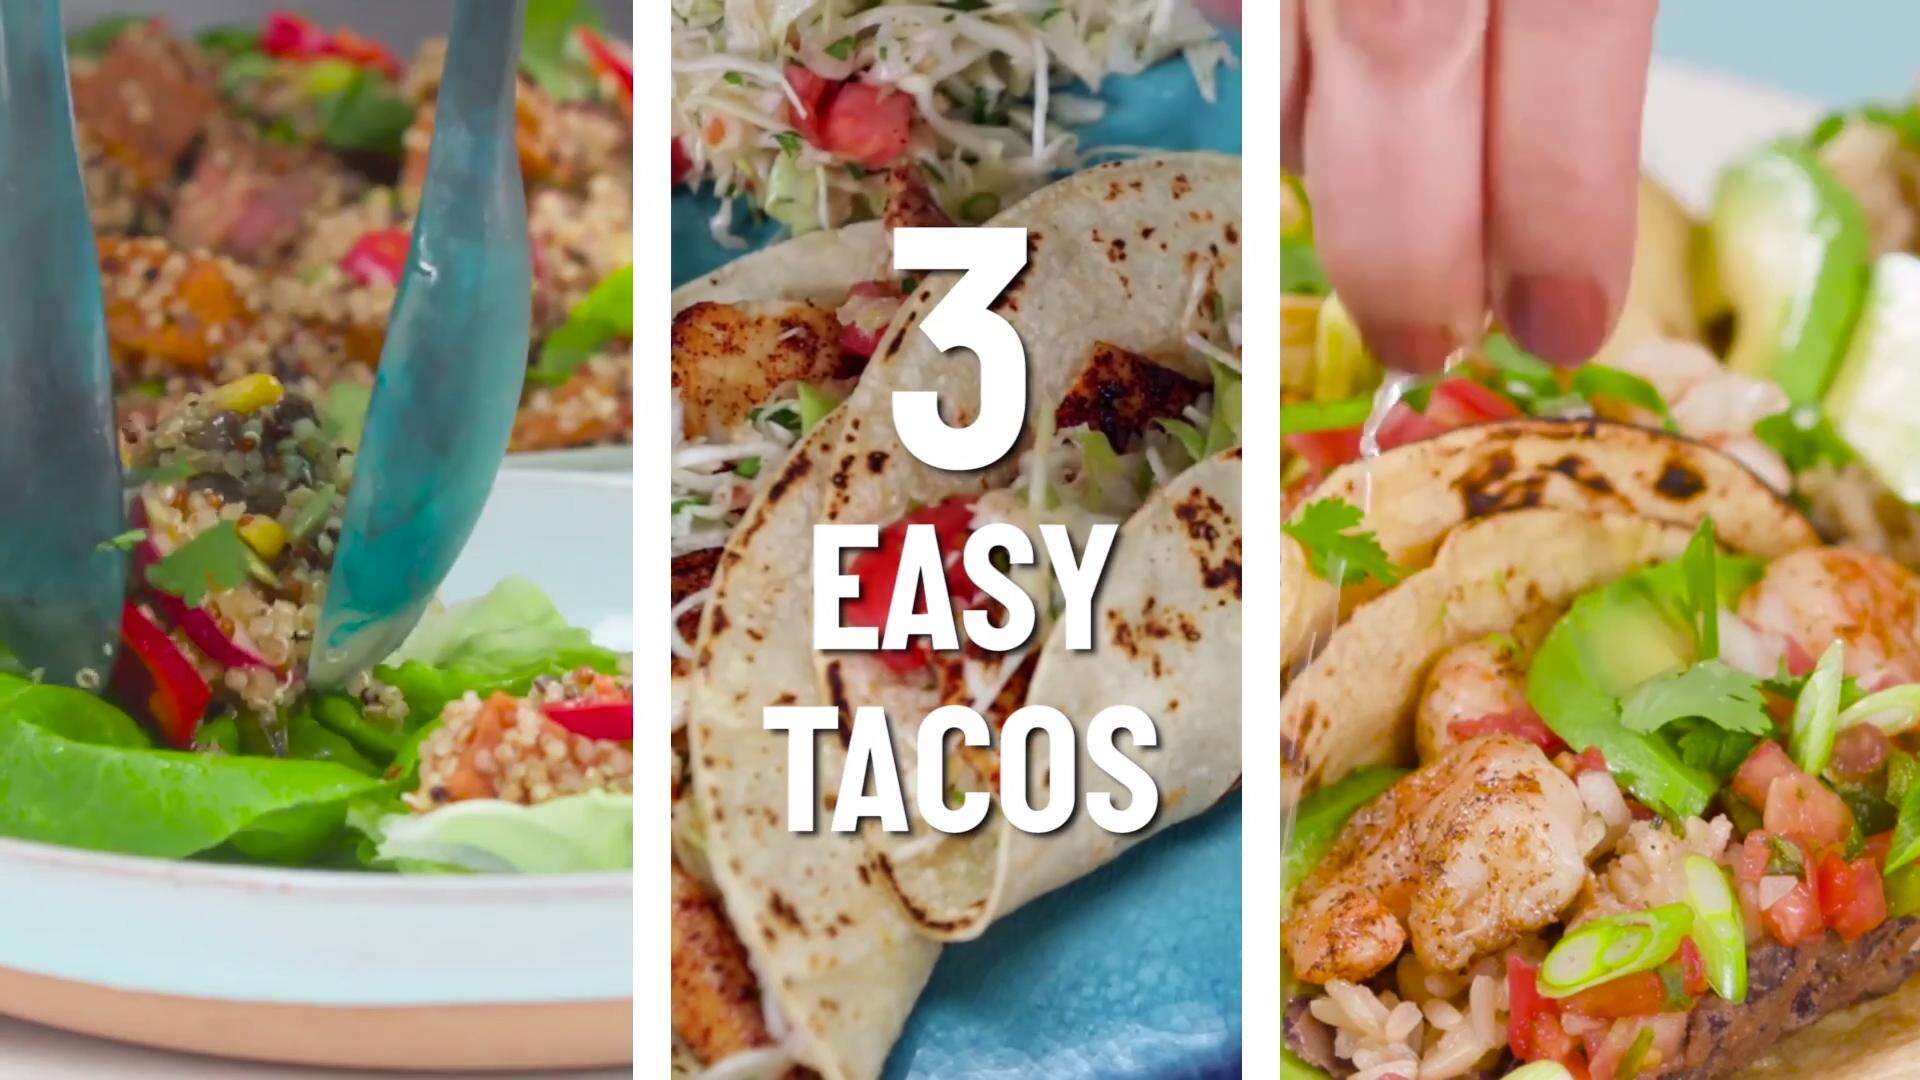 How to Make 3 Easy Taco Recipes | Cooking Light